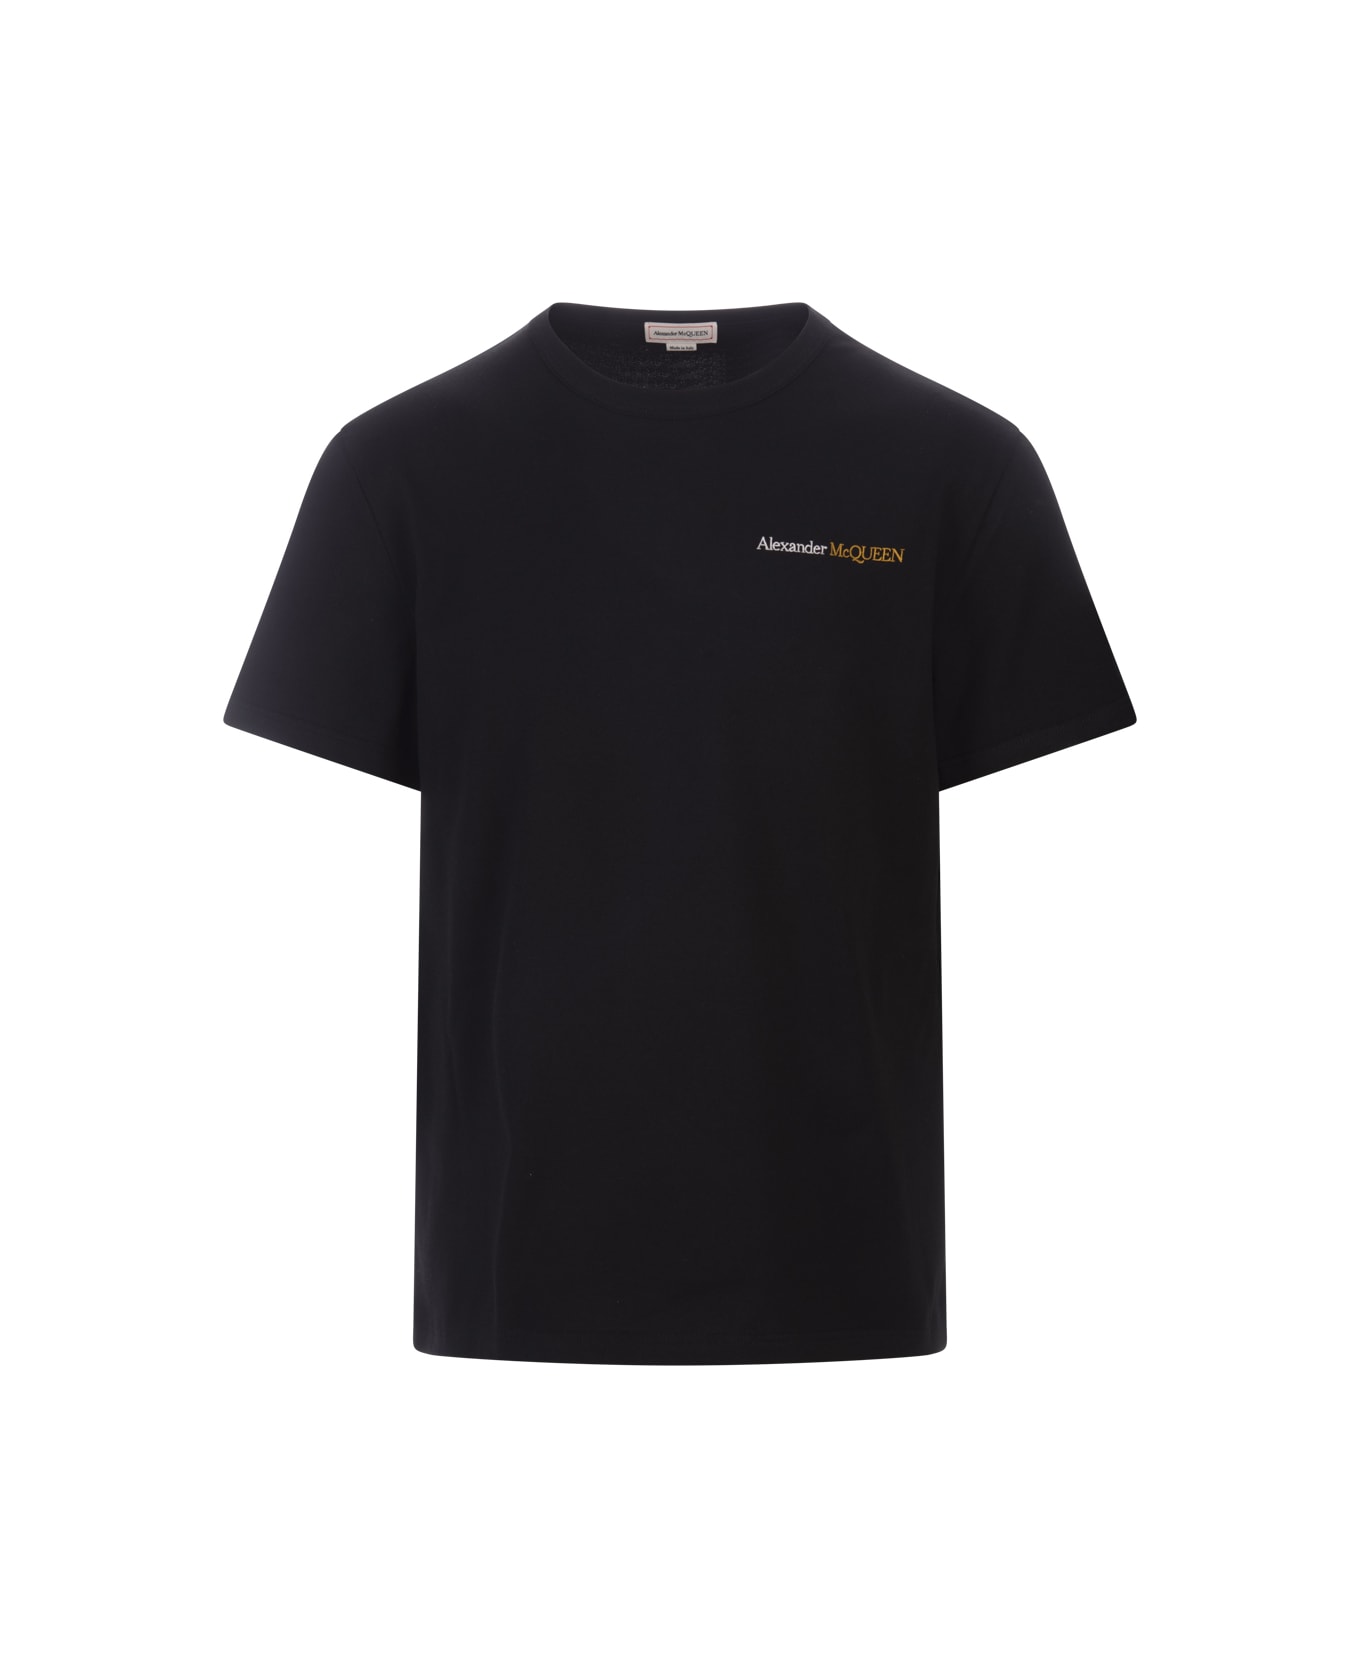 Alexander McQueen Black T-shirt With Two-tone Logo - Black シャツ